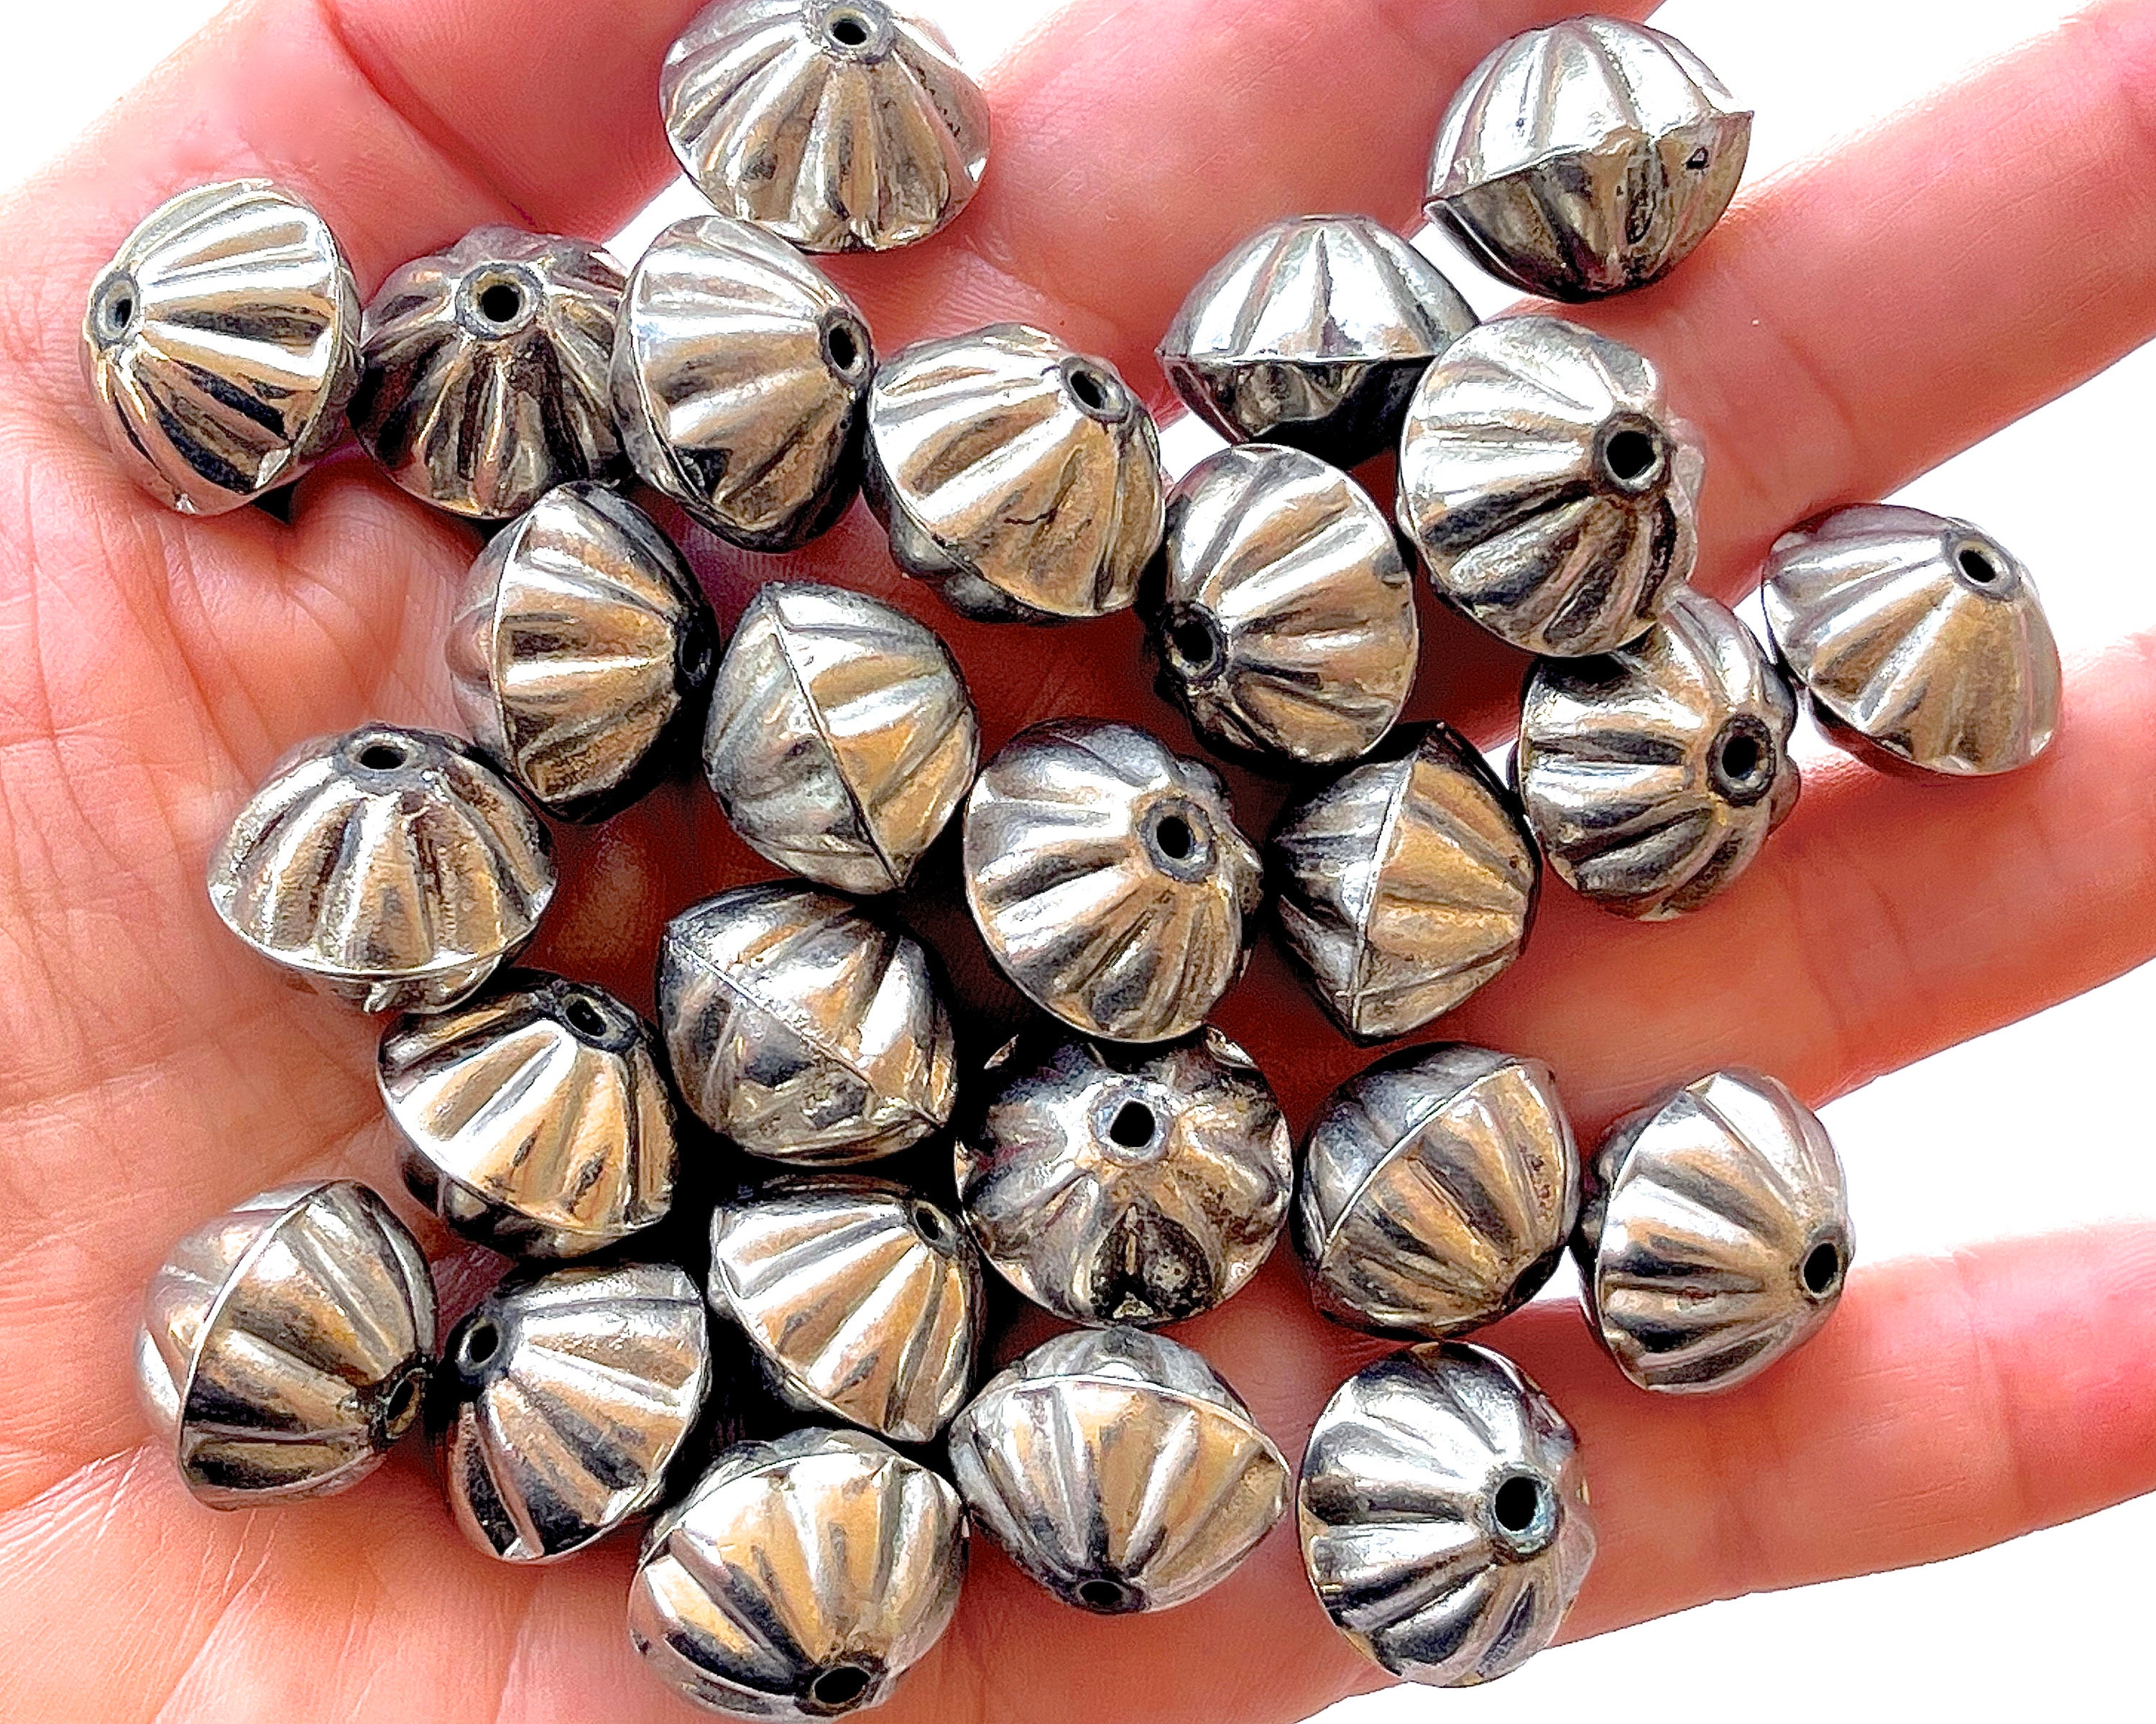 COPPER ROUND 6MM Beads 25 Pieces, Seamed Hollow bead, 1.6mm Hole, Ready to  Ship, Made in US